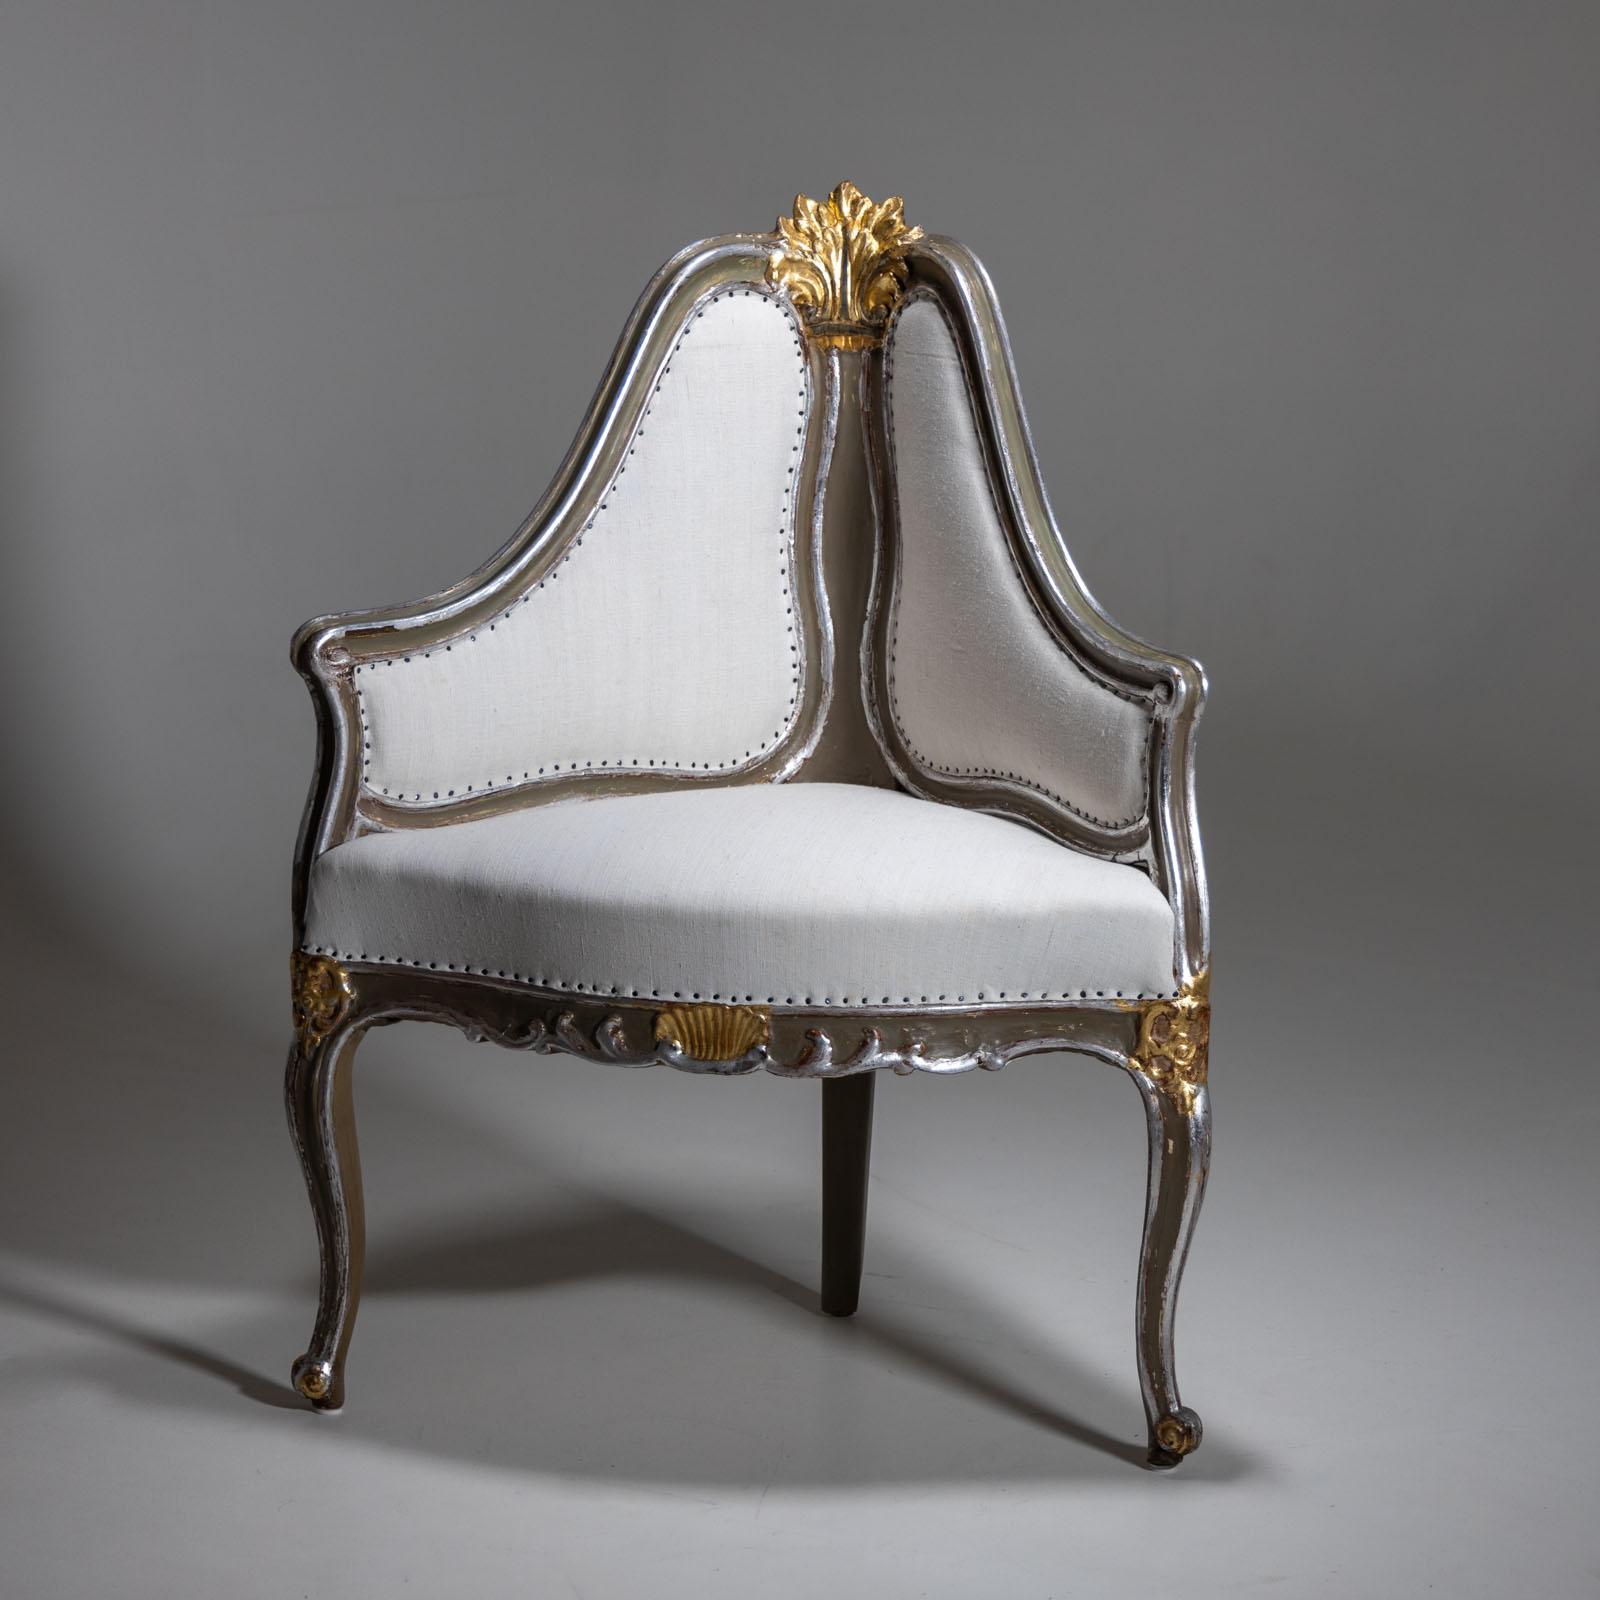 Baroque Upholstered Corner armchair in baroque style, 19th century